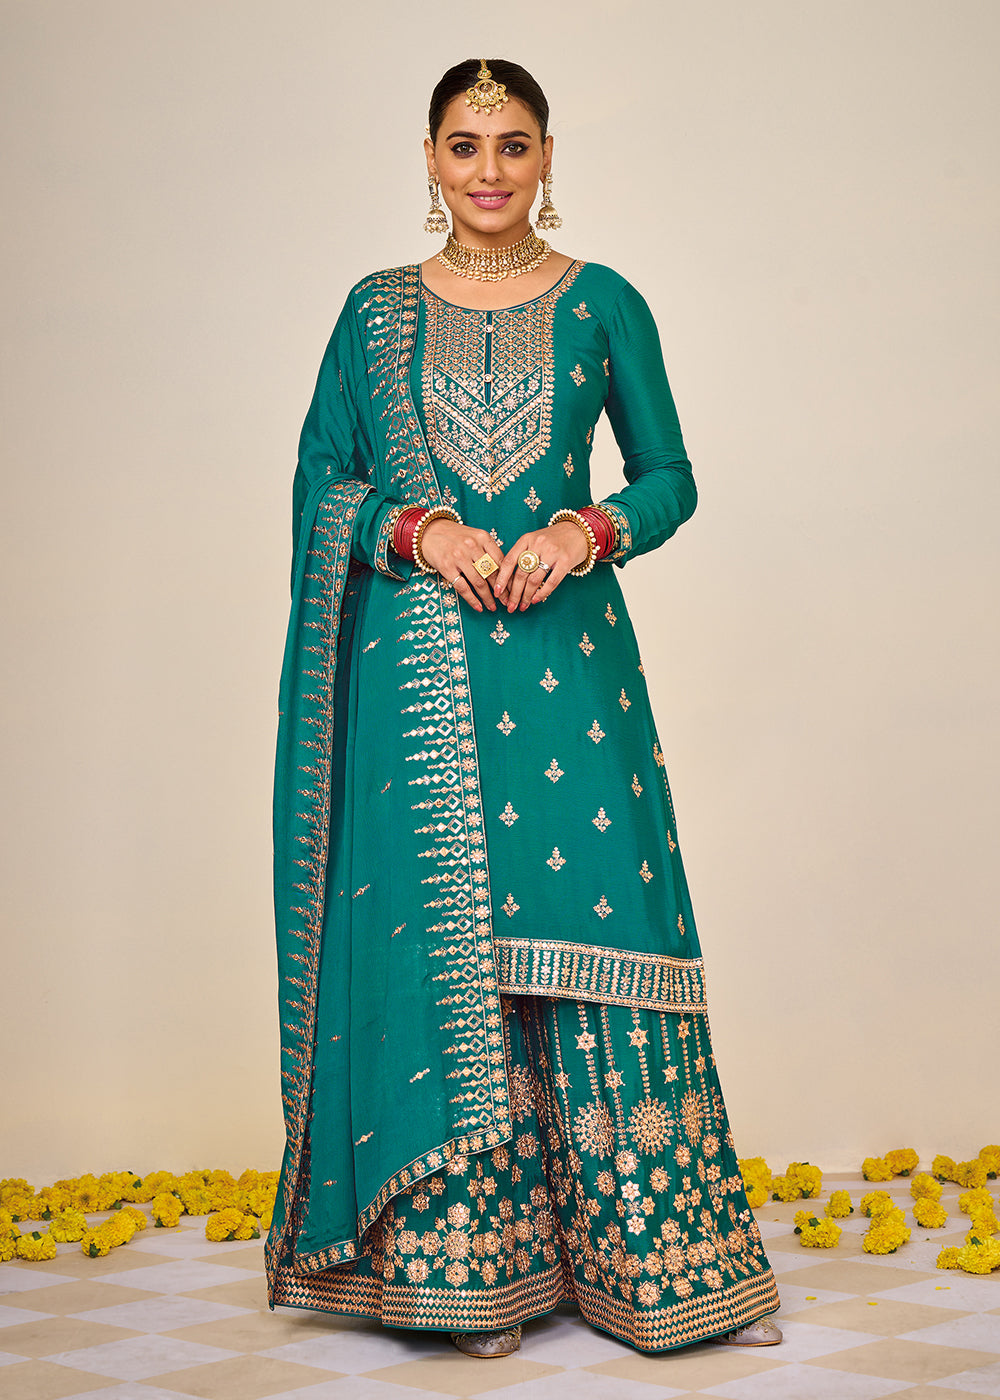 Buy Now Wedding Festival Teal Embroidered Palazzo Salwar Suit Online in USA, UK, Canada & Worldwide at Empress Clothing.